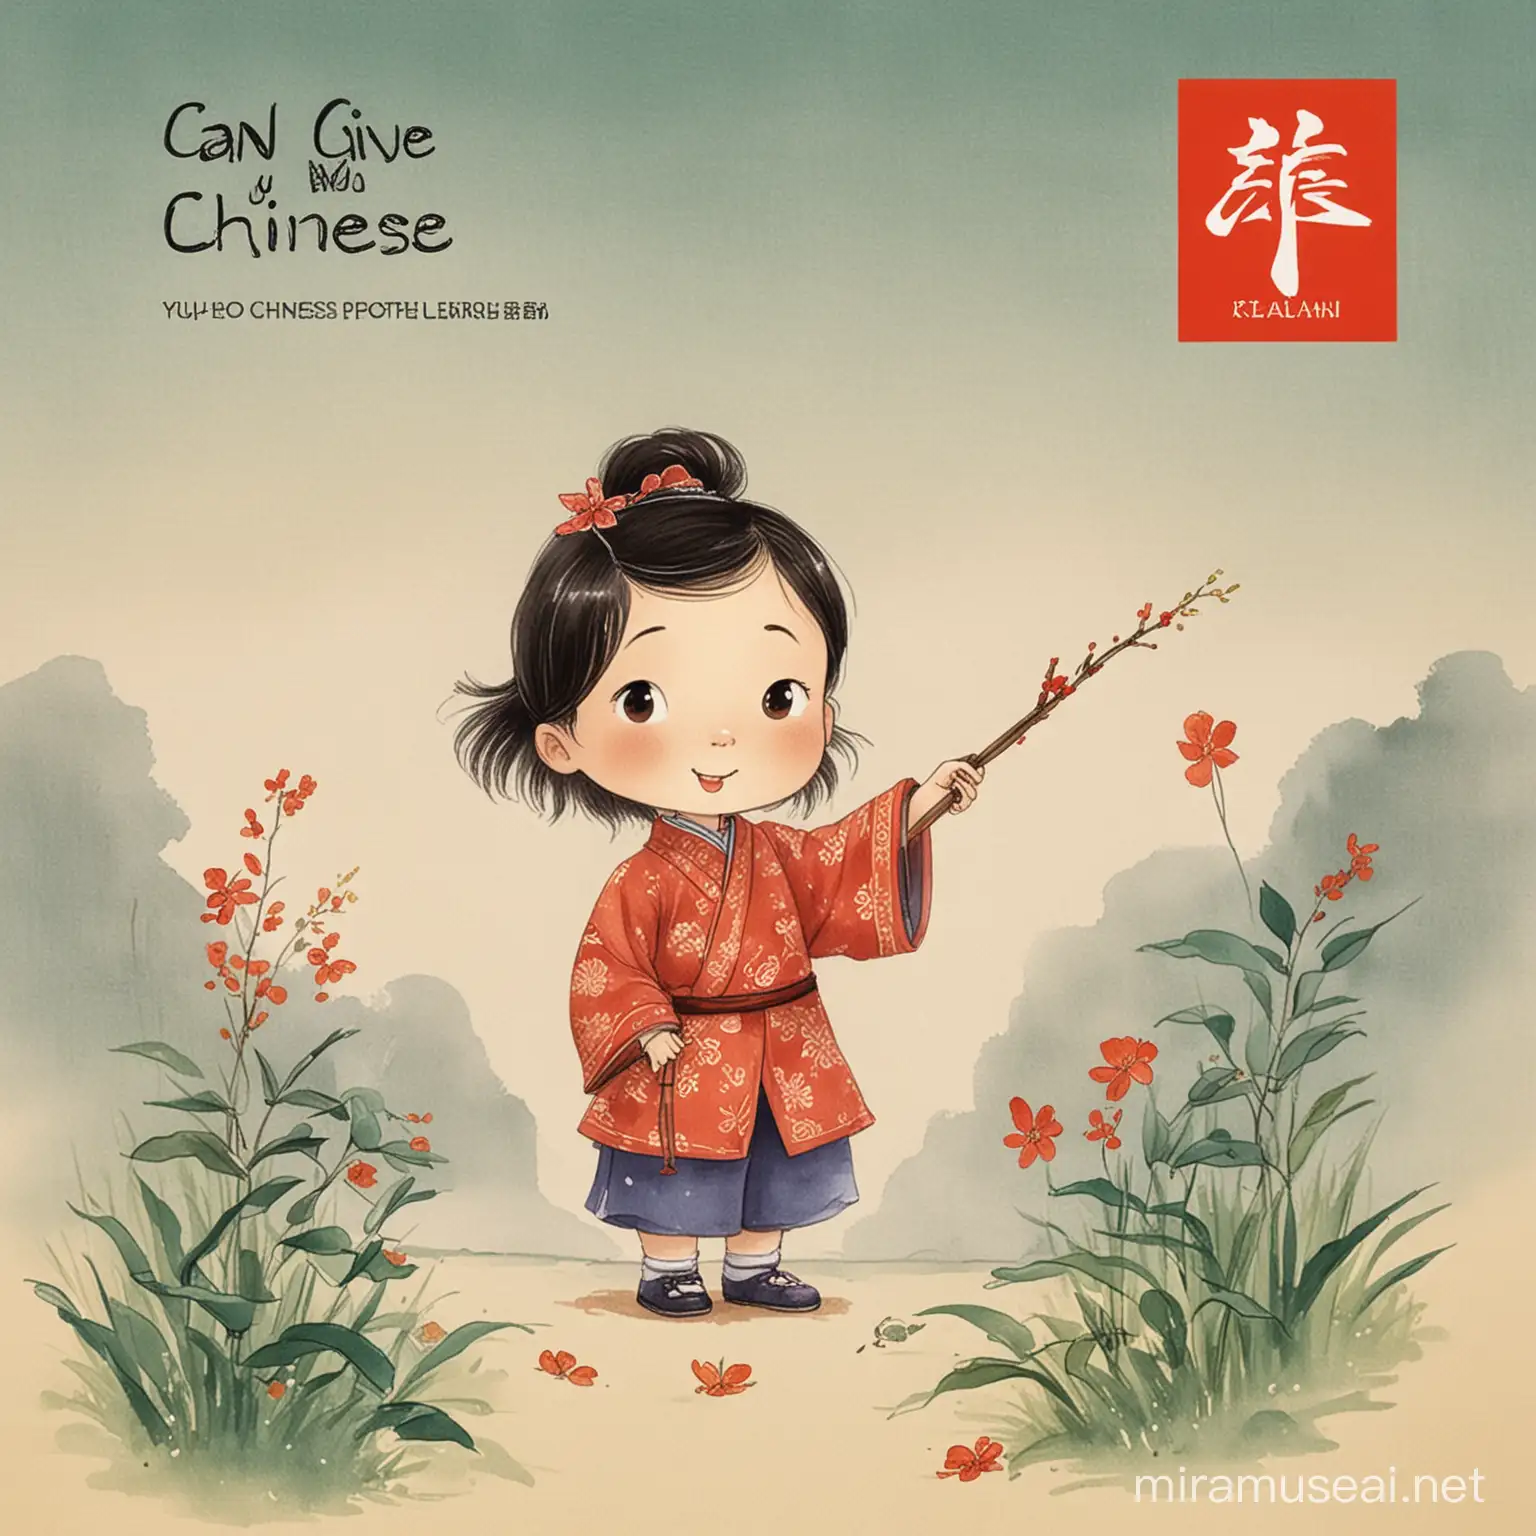 can you give me a chinese poem textbook cover for primary students